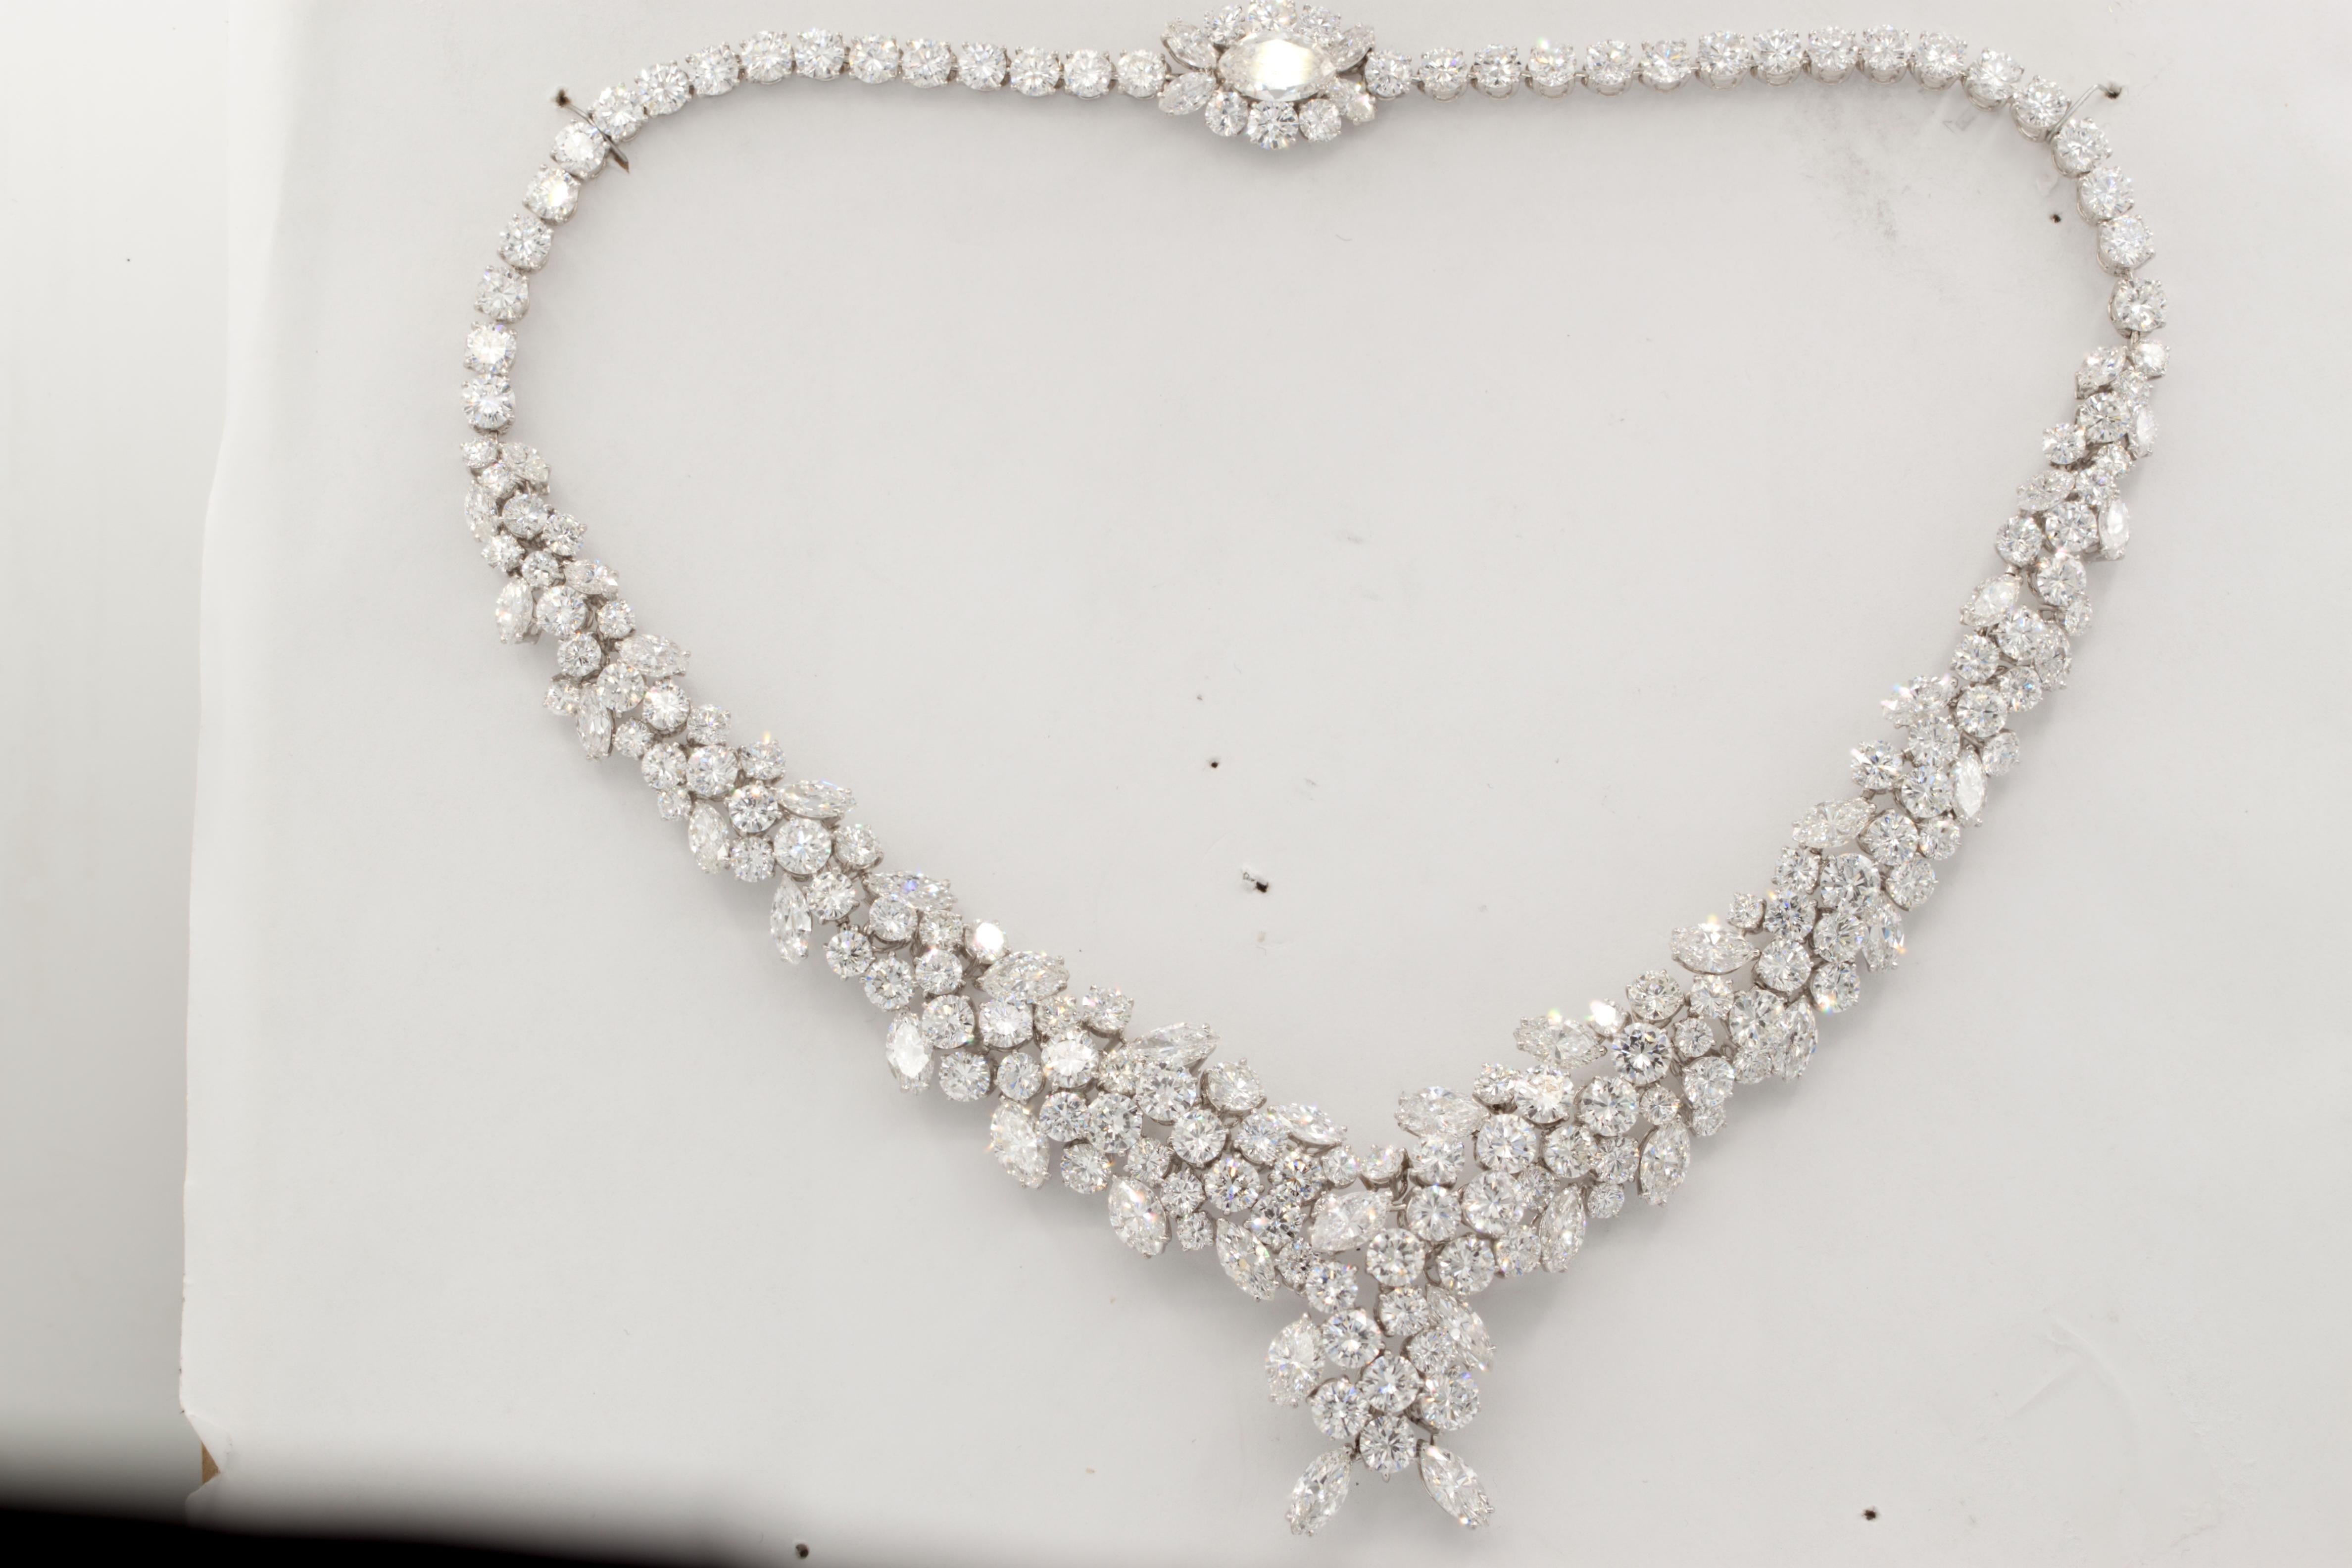 An Important Diamond Cluster Diamond Necklace mounted in Platinum set with Pear-shaped, marquise and round diamonds weighting 70.00 carats of F-G in Color VS - SI in clarity diamonds.  

Box closure

Diamond specifications:
F-G VS-SI 

This product